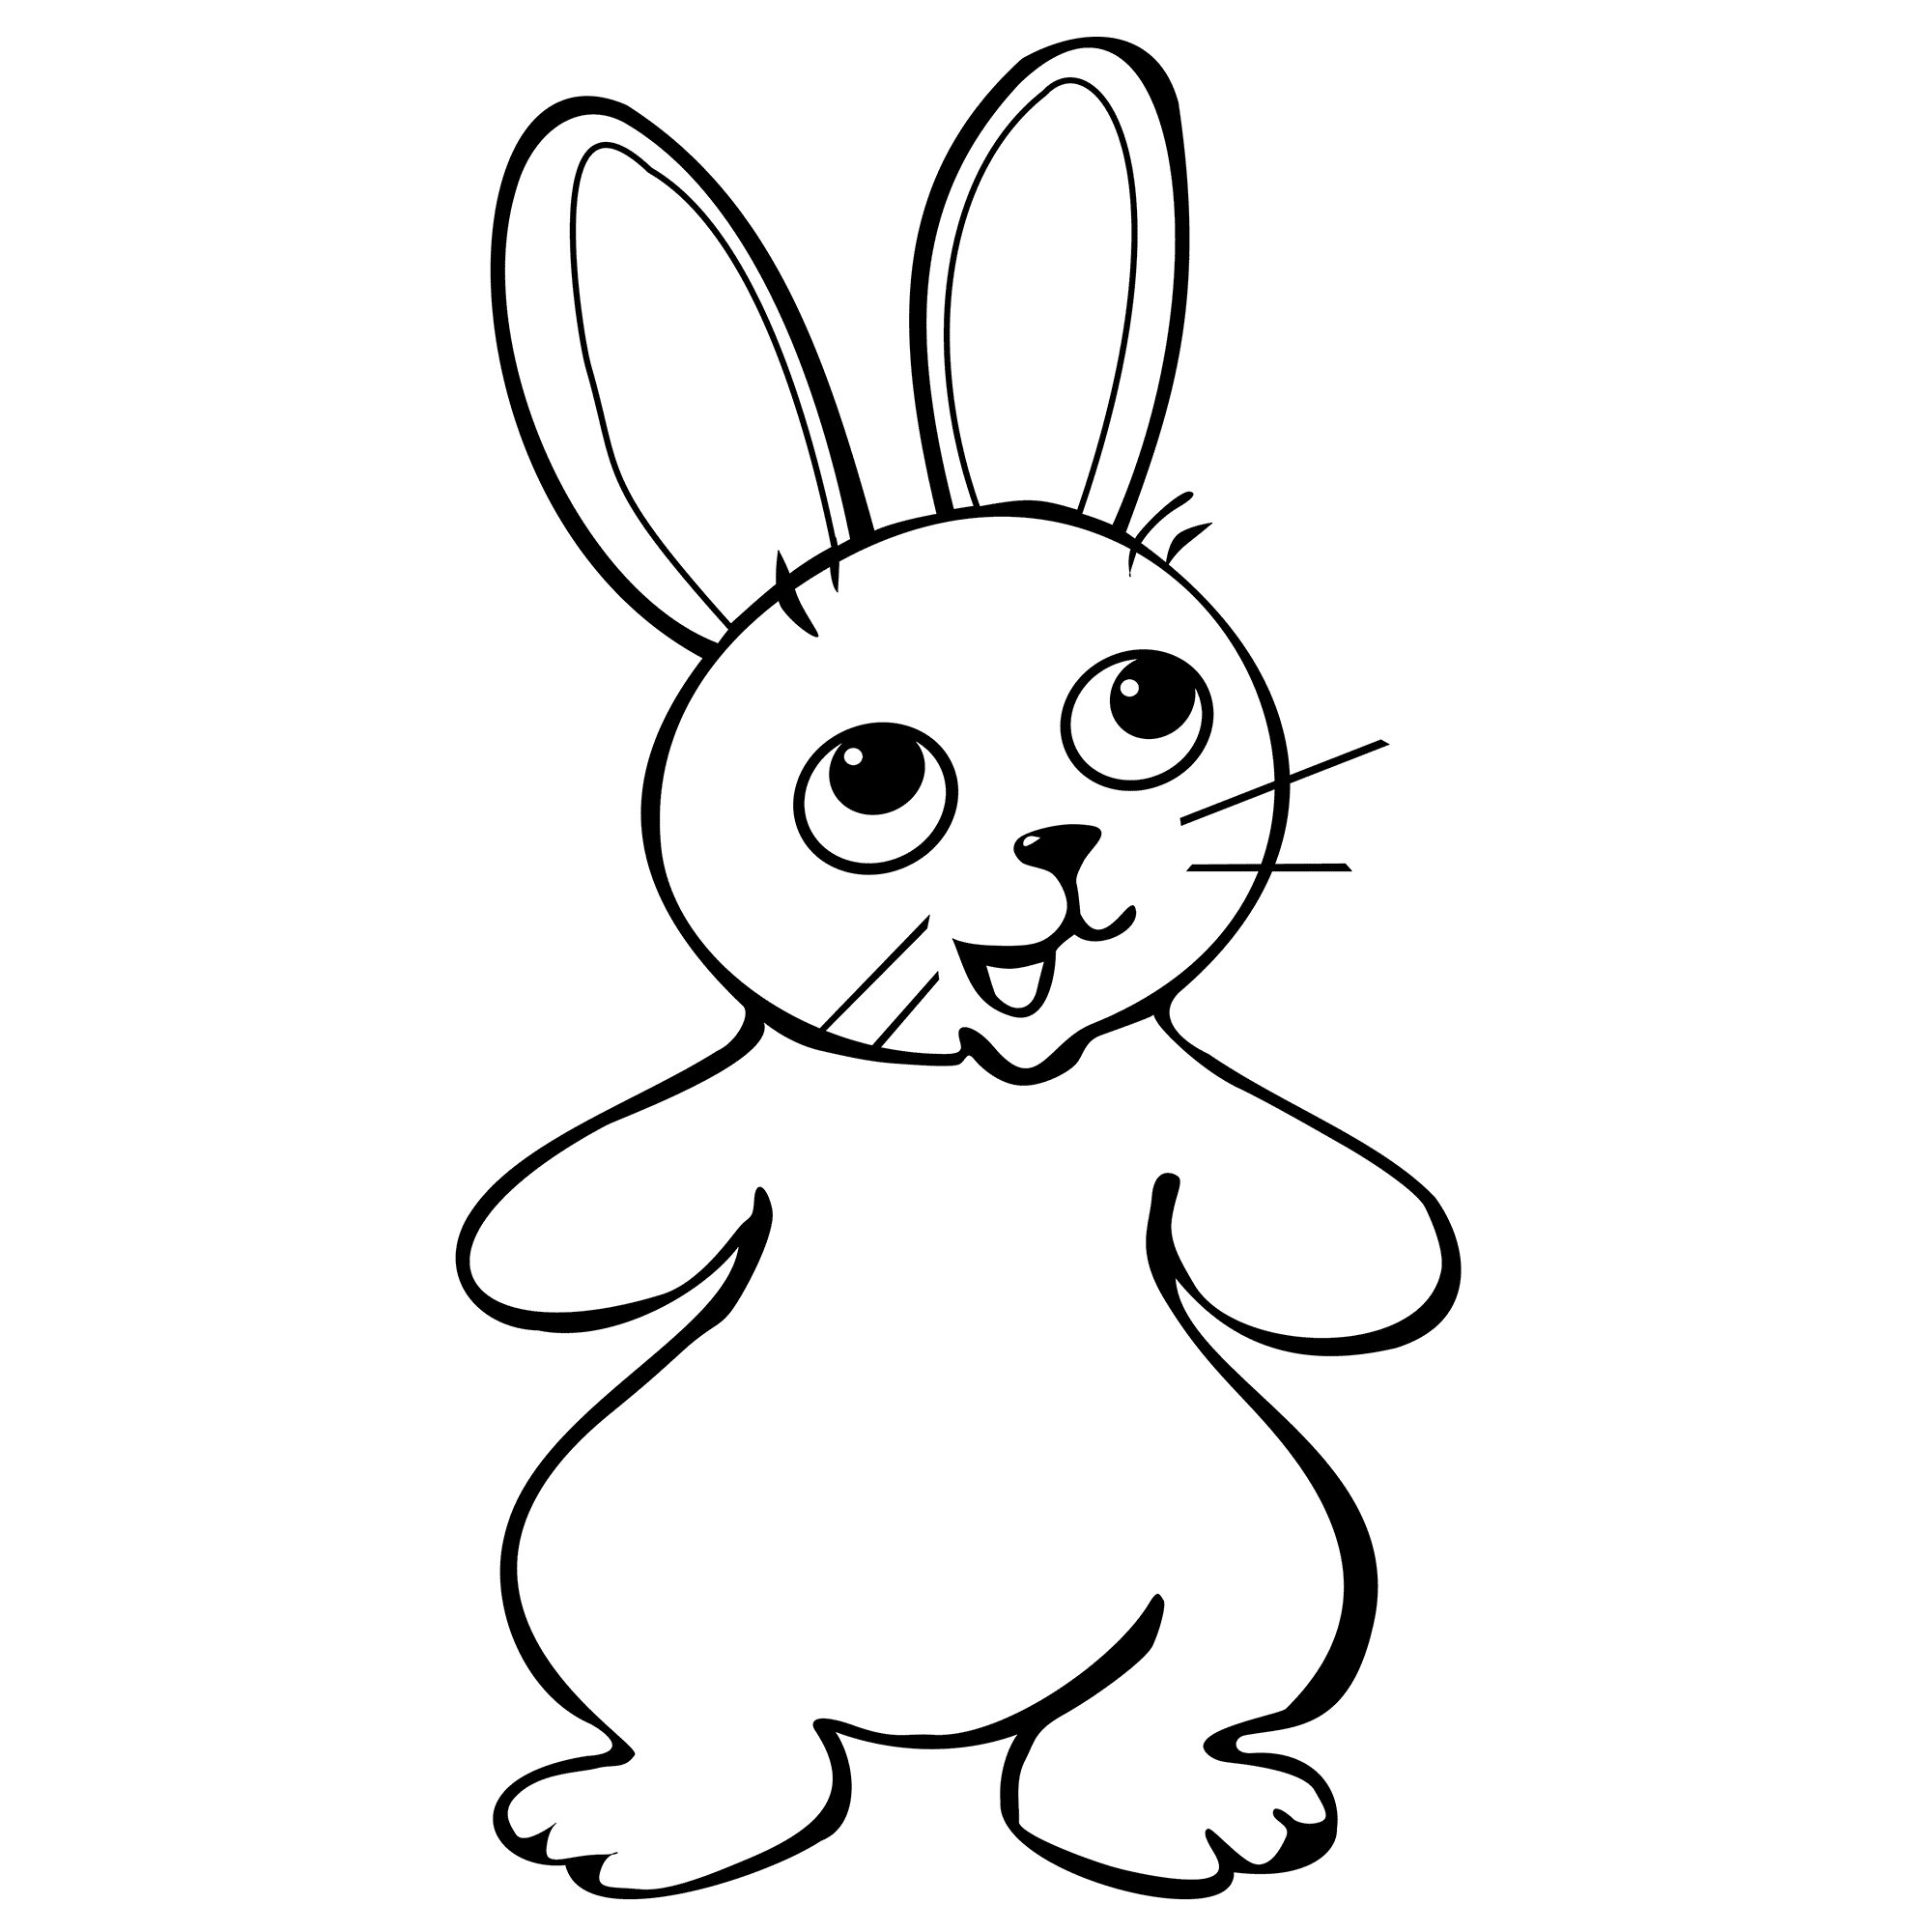 bunny coloring picture bunny coloring pages best coloring pages for kids picture coloring bunny 